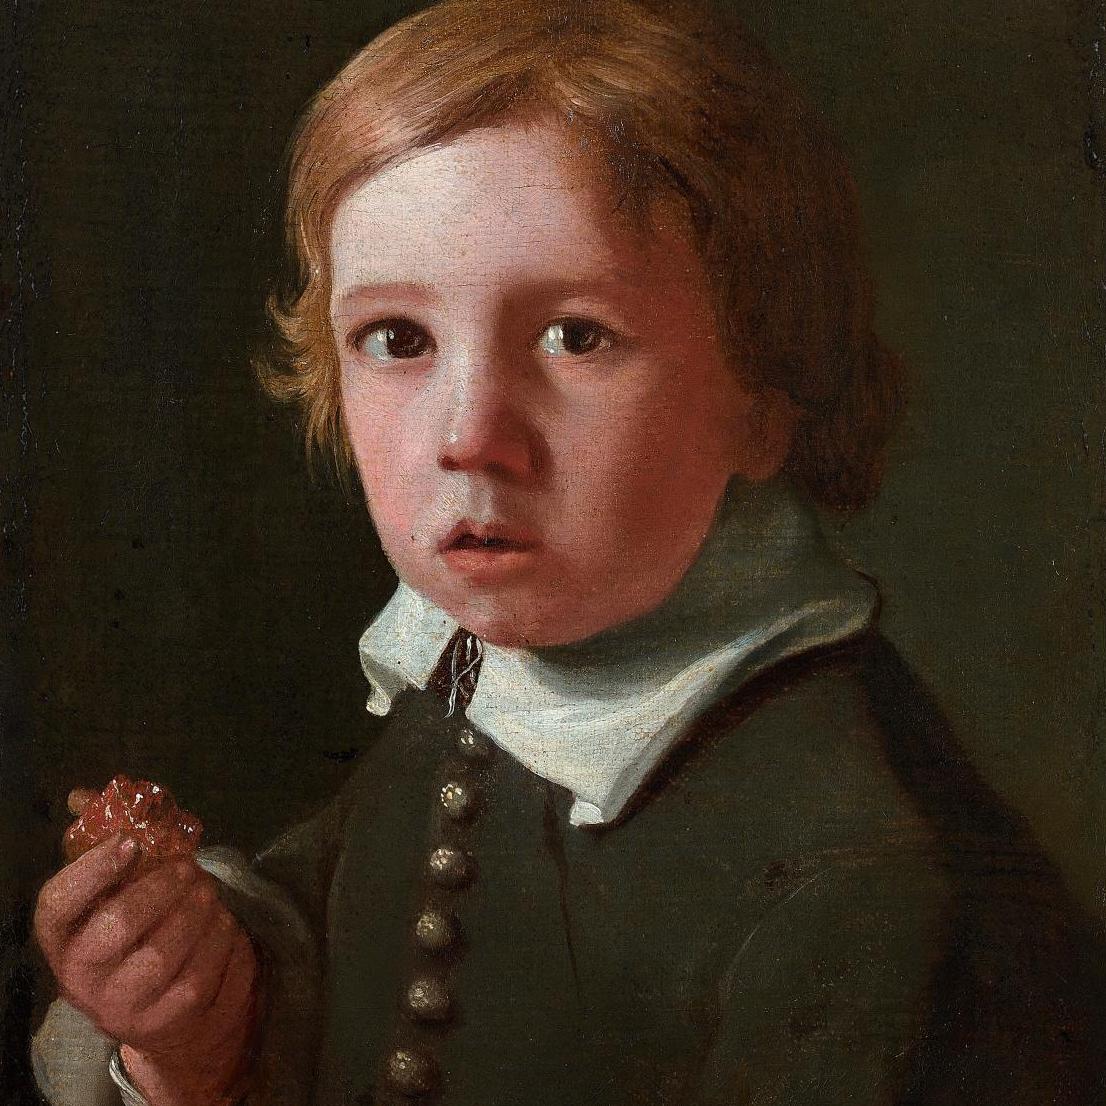 Sweerts and the Taste of Childhood